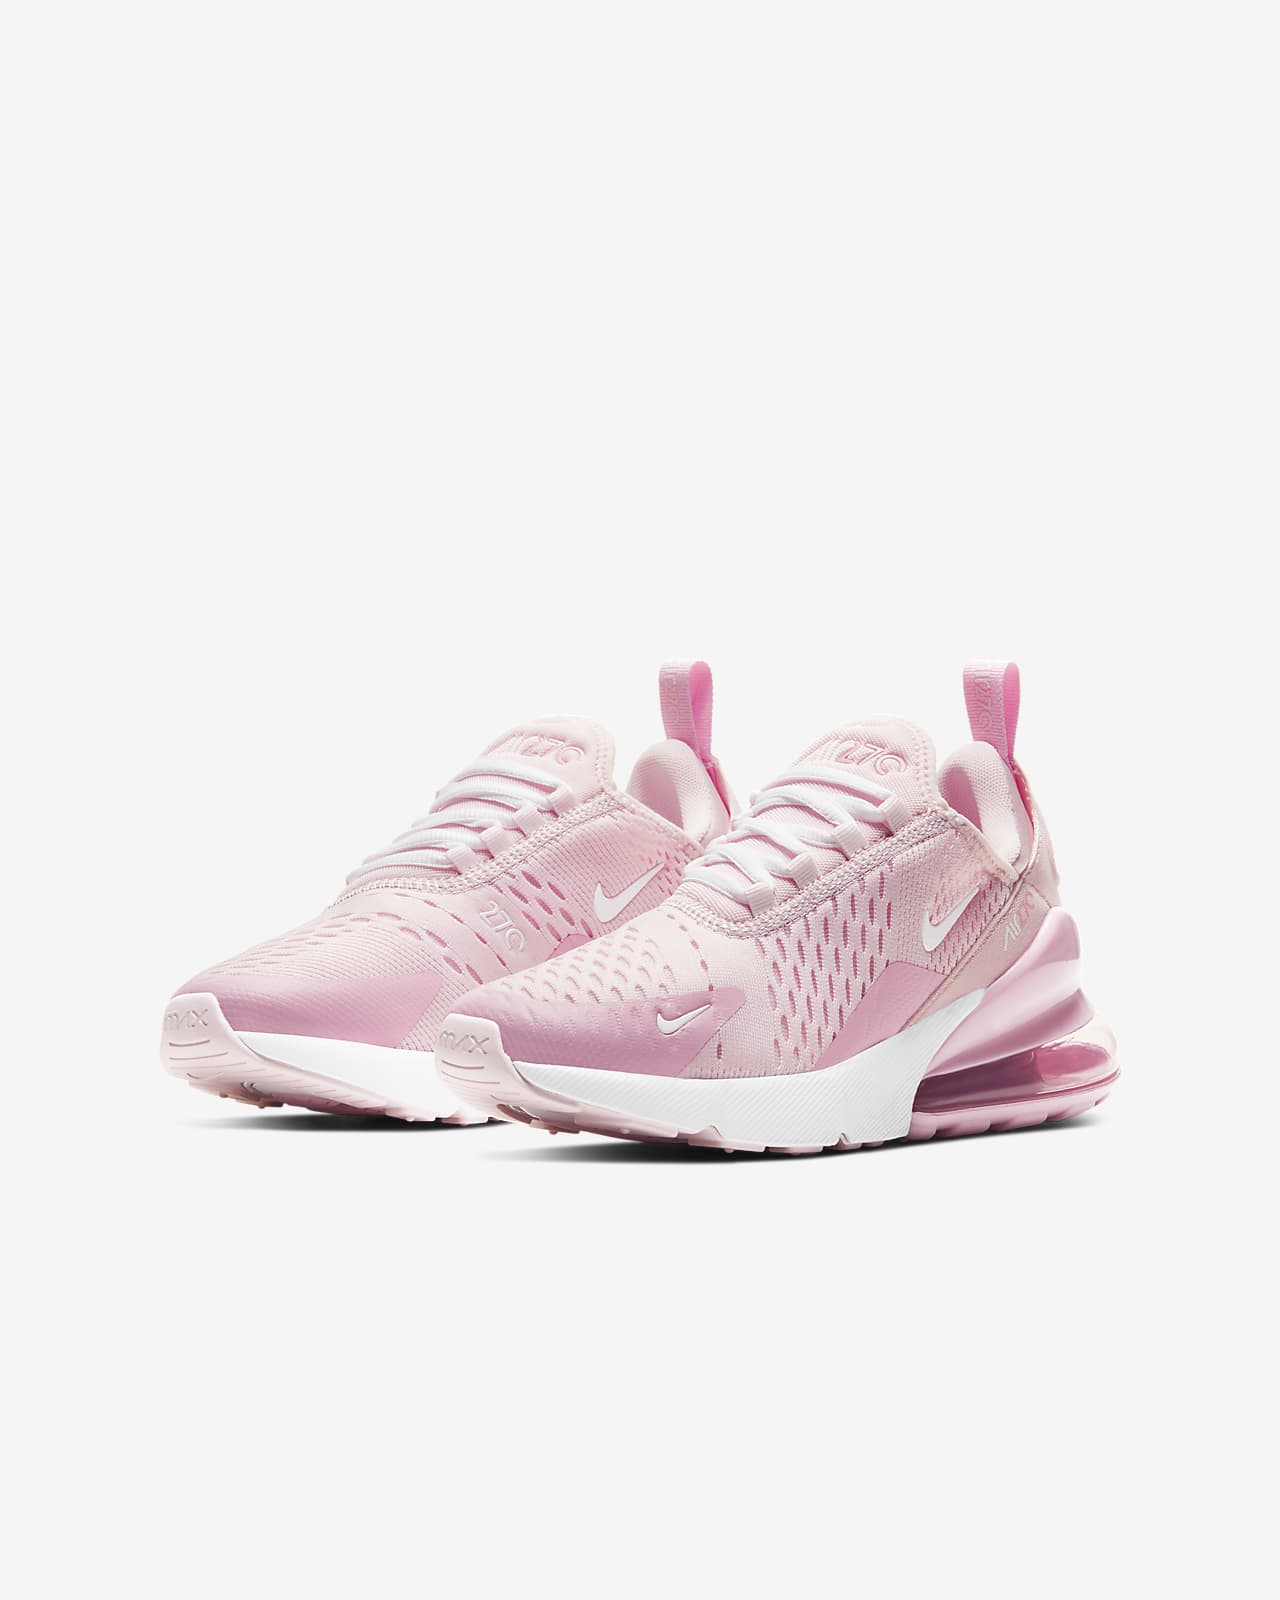 white and pink nike air max 270